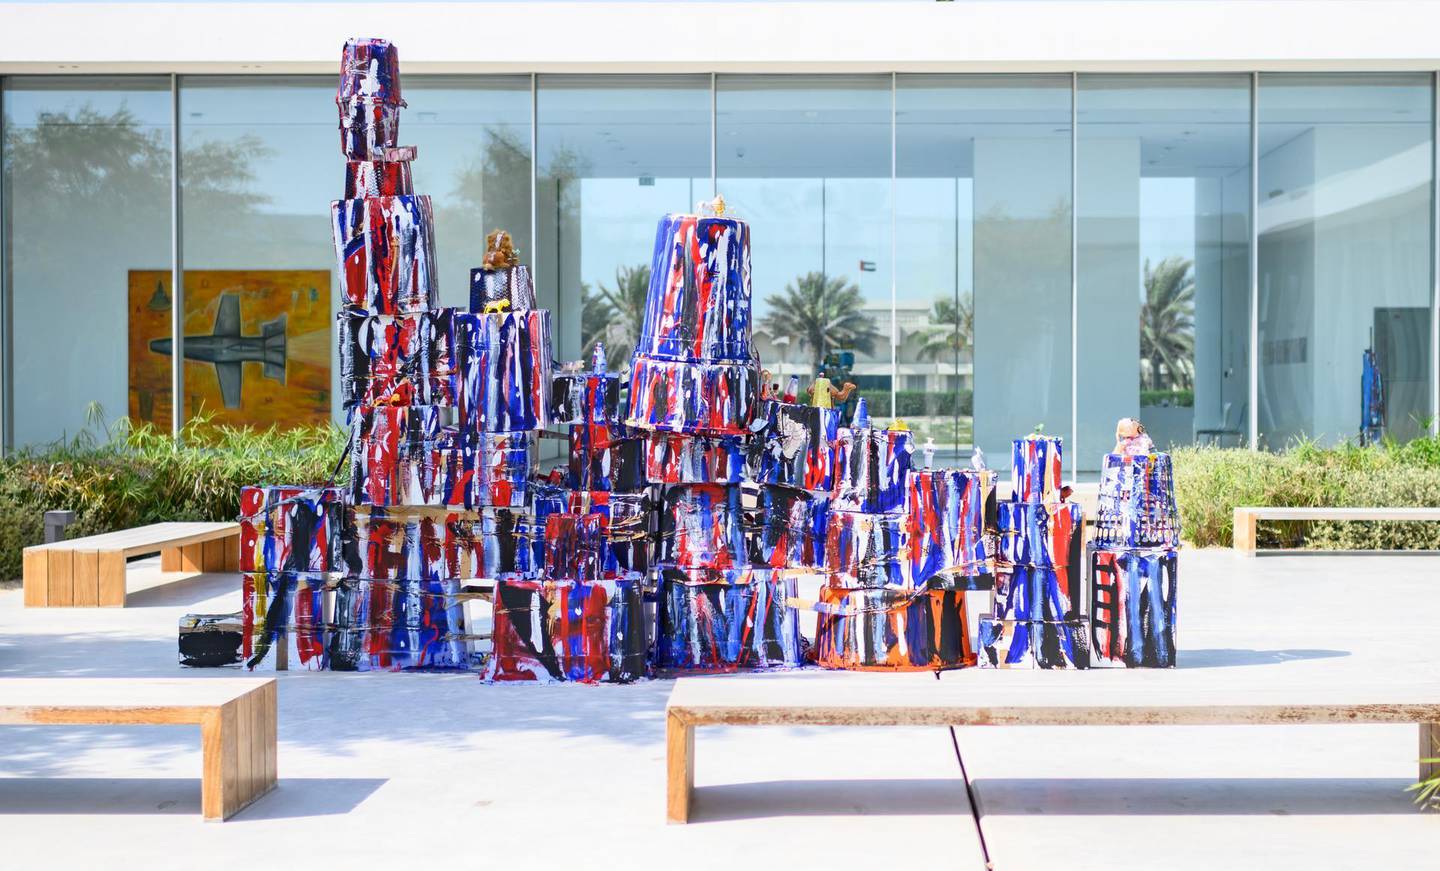 Andrew Stahl made his latest sculpture, ‘Astro Fragility’, in 15 days while he was setting up the show. Courtesy Sharjah Art Foundation